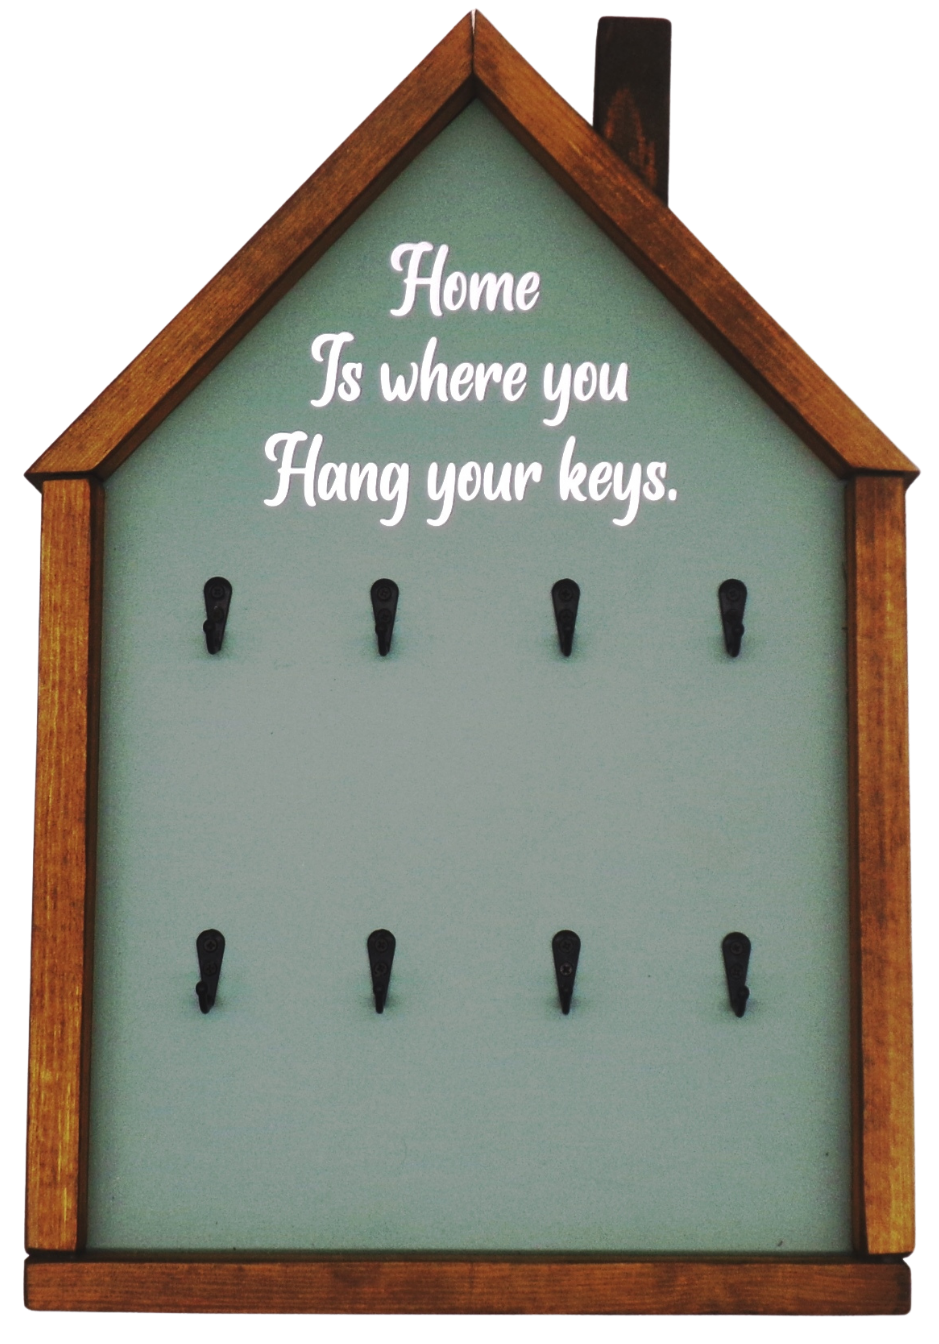 Home is where you hang your keys